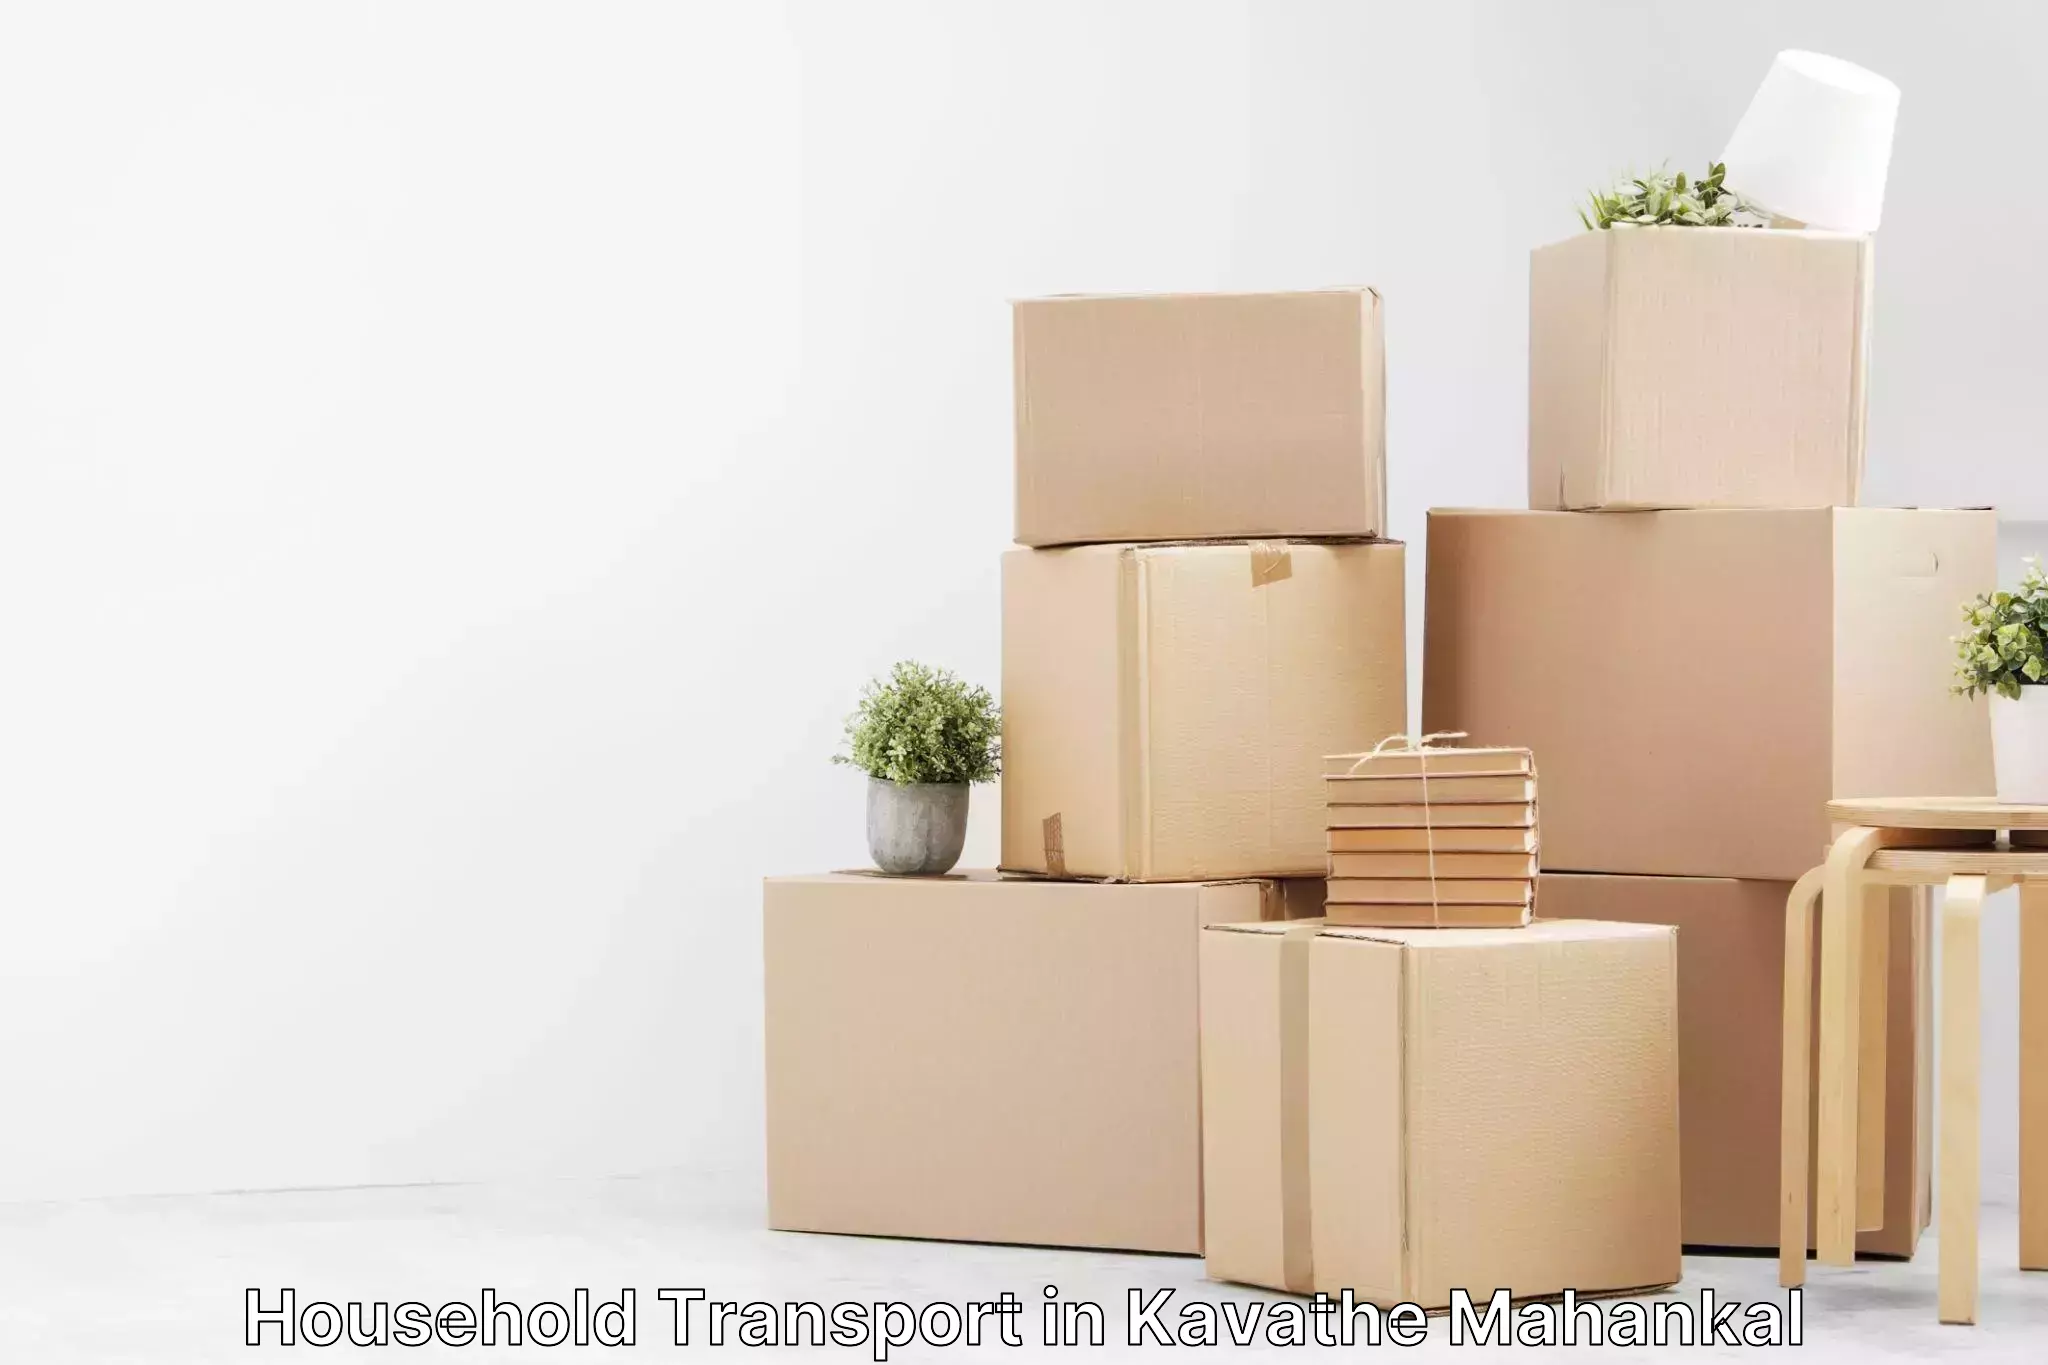 Household logistics services in Kavathe Mahankal